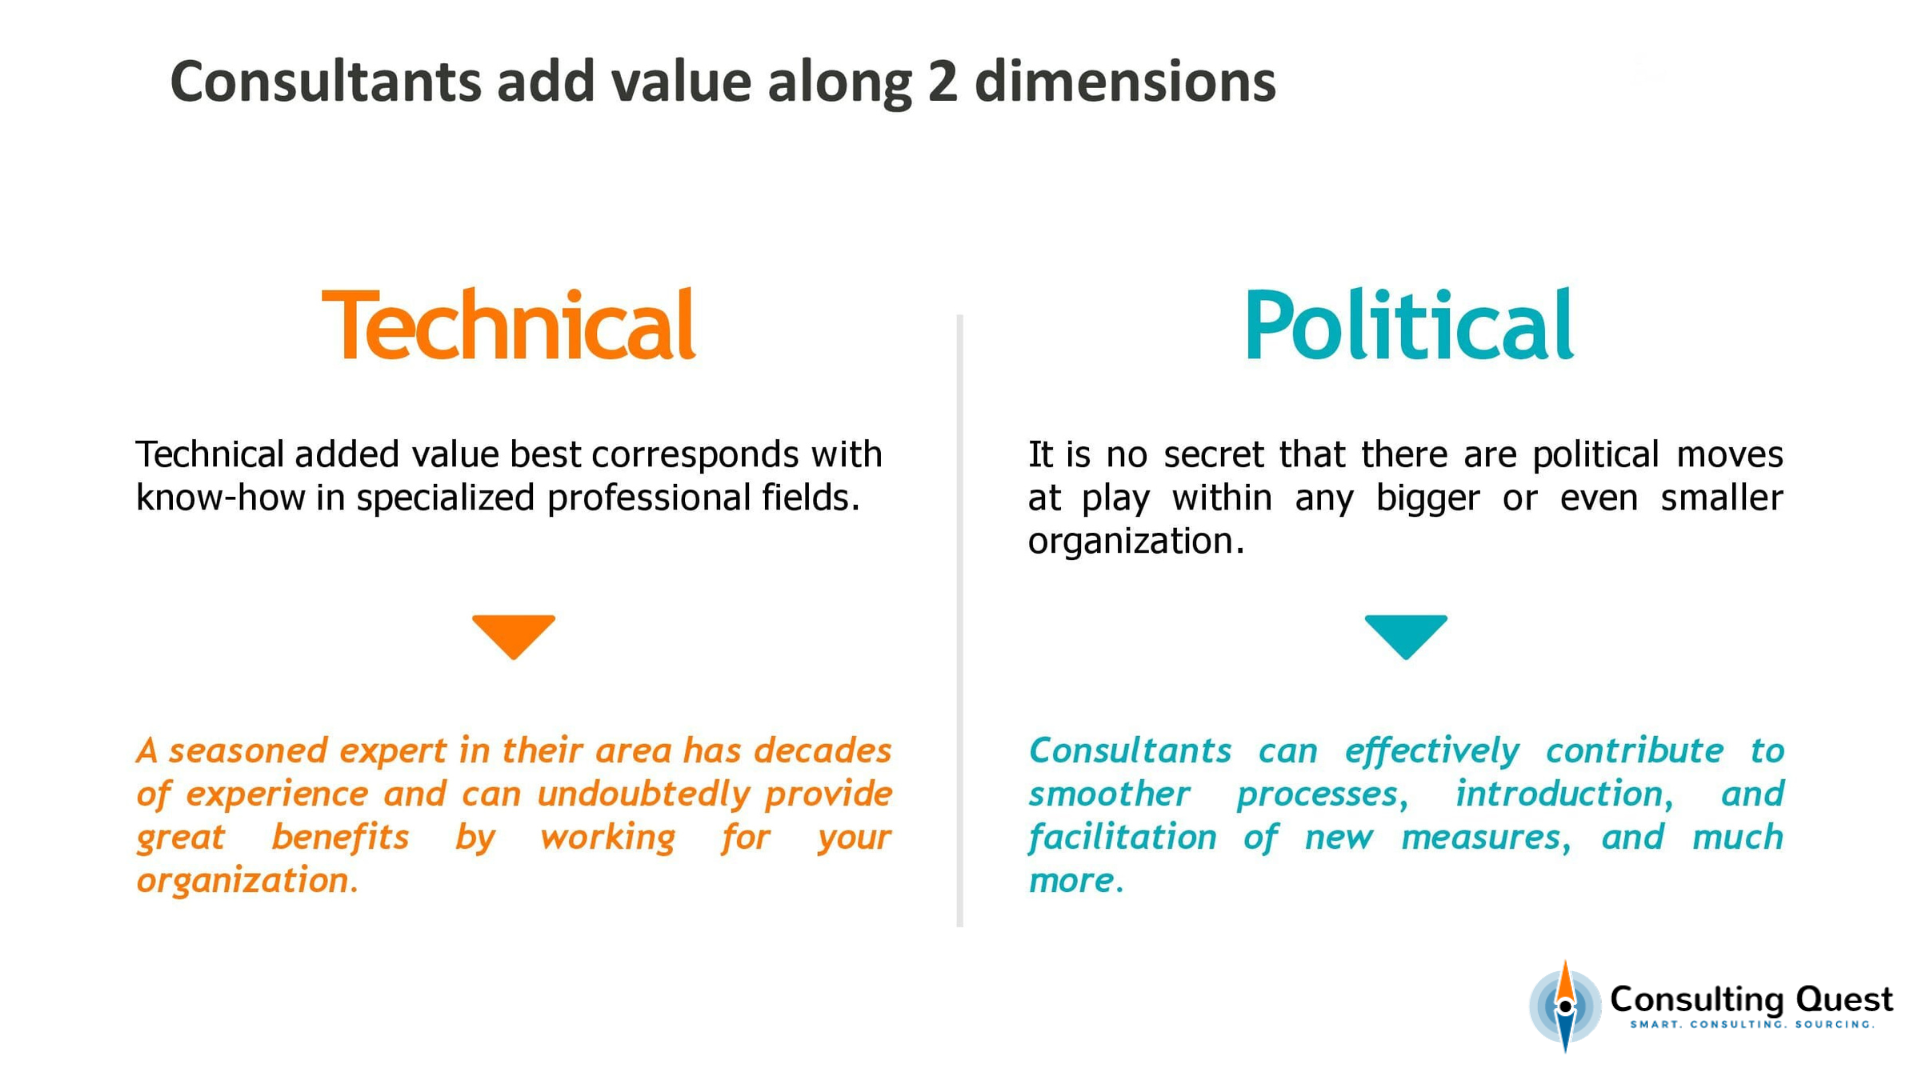 Consultants add value along 2 dimensions